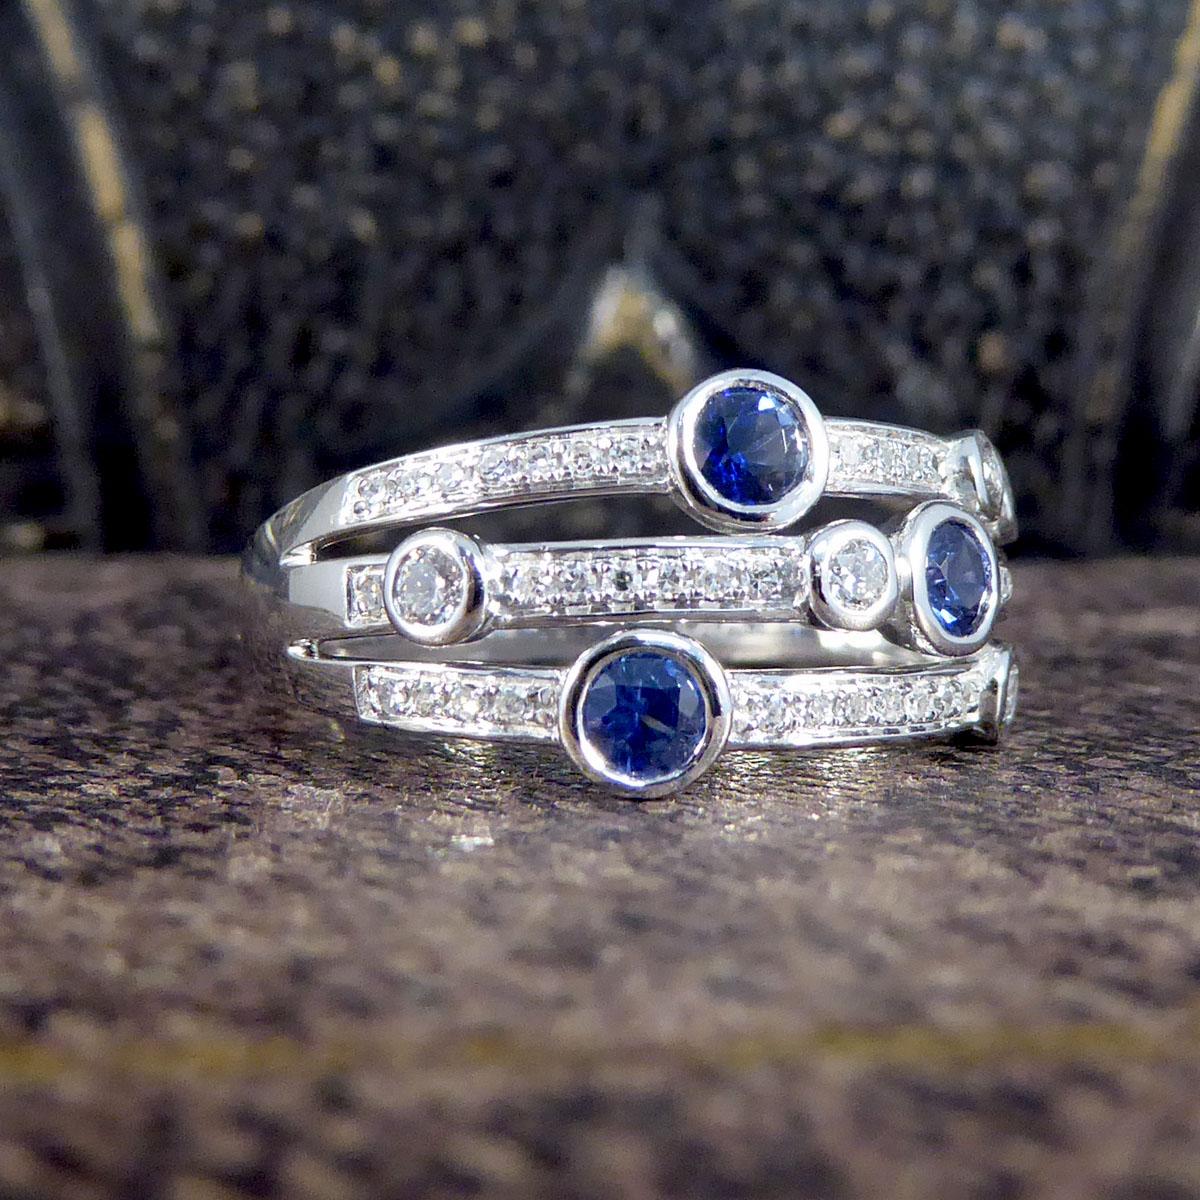 Three strands make up this modern ring, broad in width but elegant in appearance and a brand new ring featuring a combination of Sapphires and Diamonds. Each strand holds a Sapphire in a rub over collar setting with one or two Diamonds mounted the